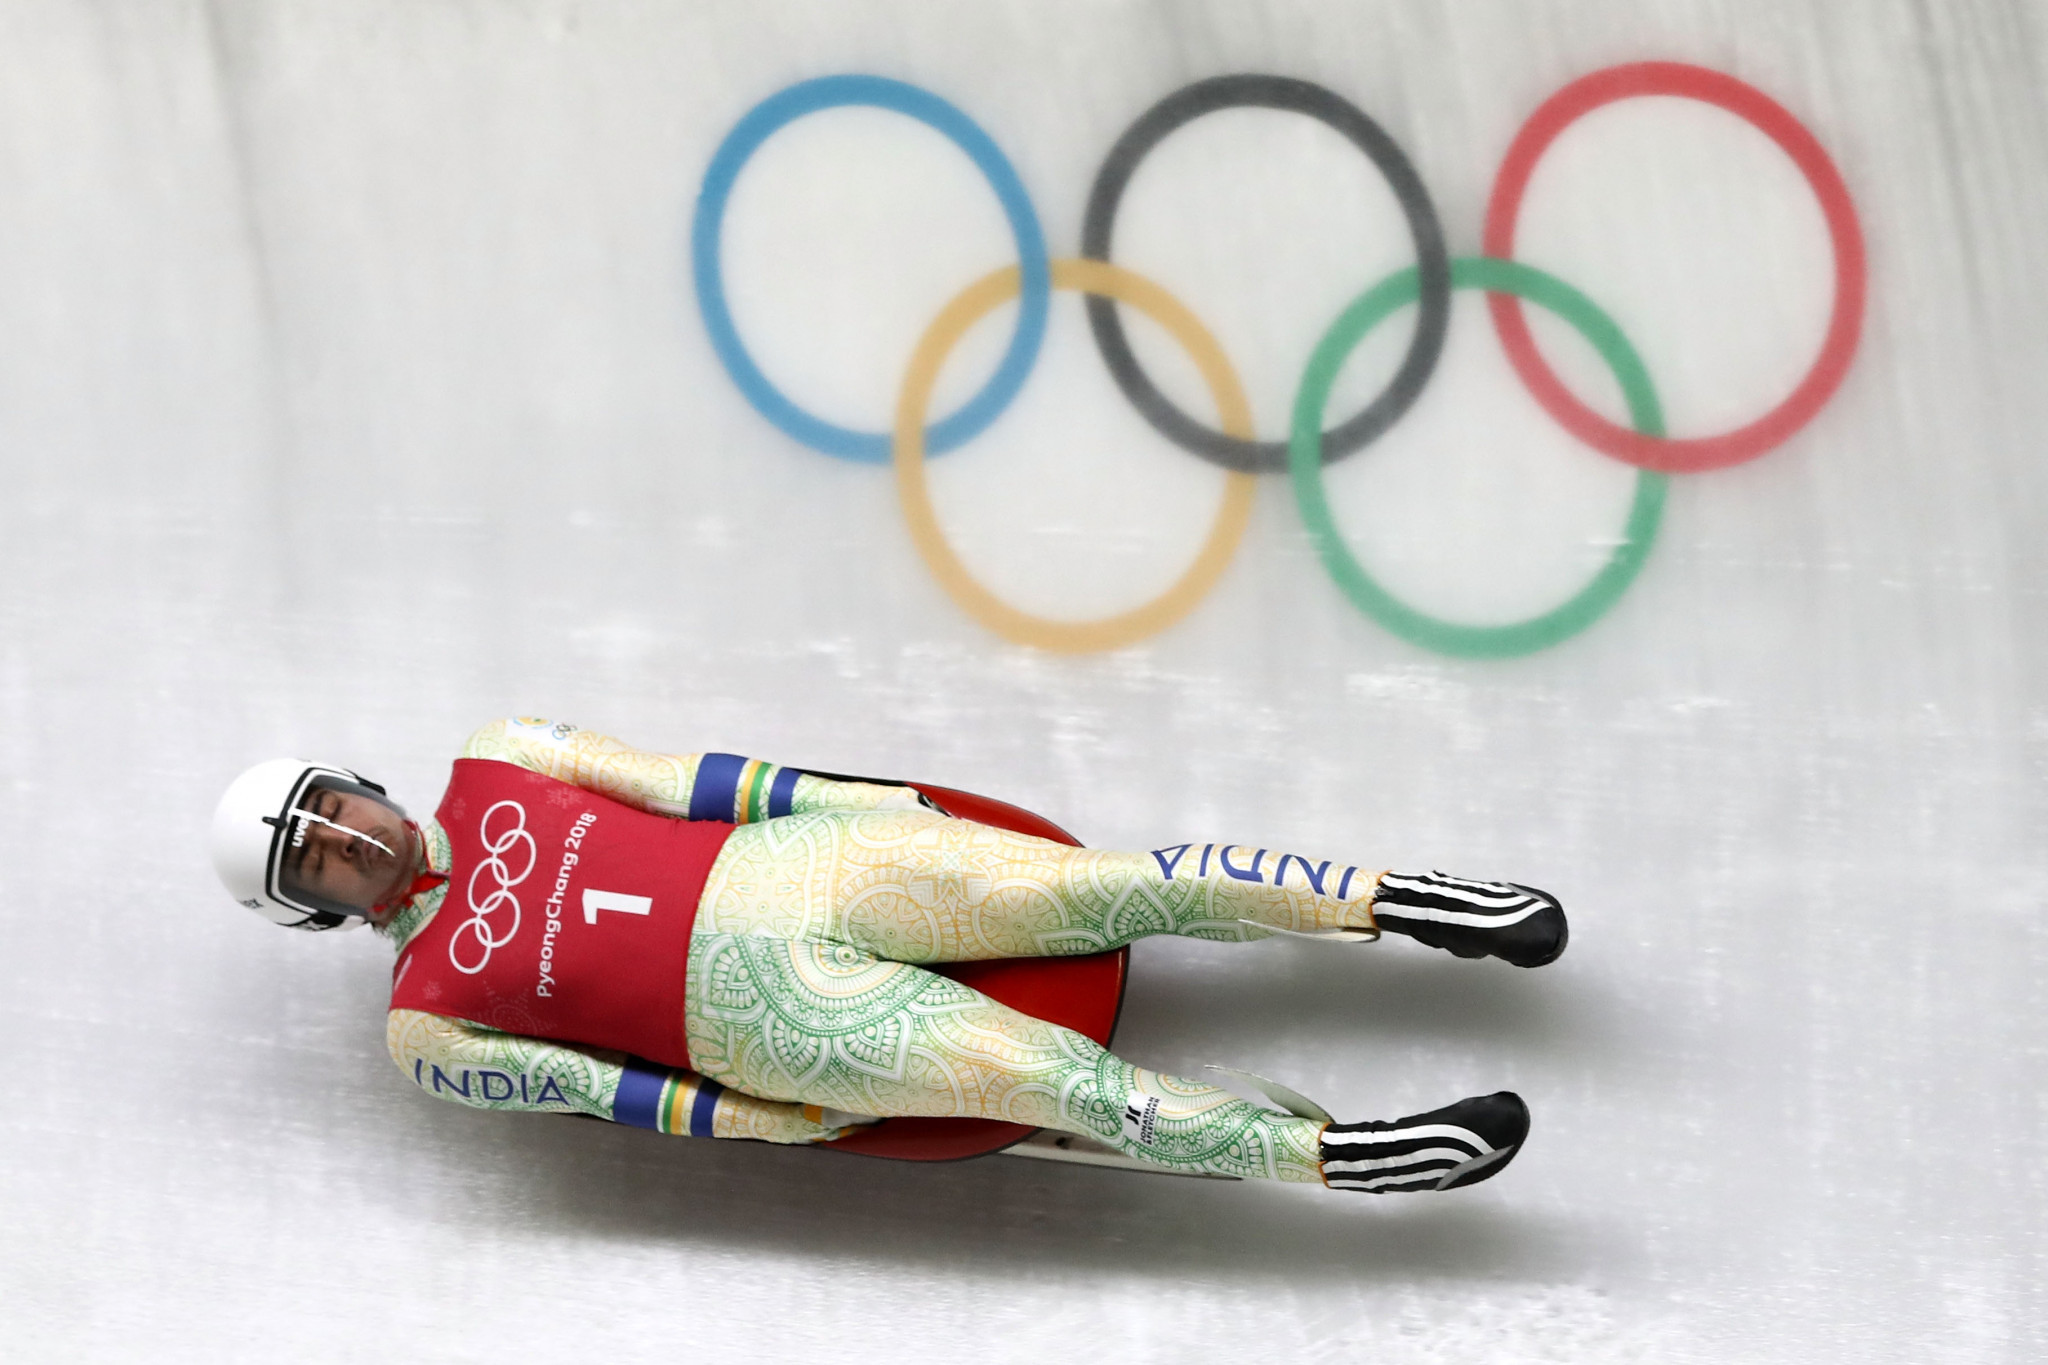 Keshavan calls out Indian Government for lack of investment in winter sports